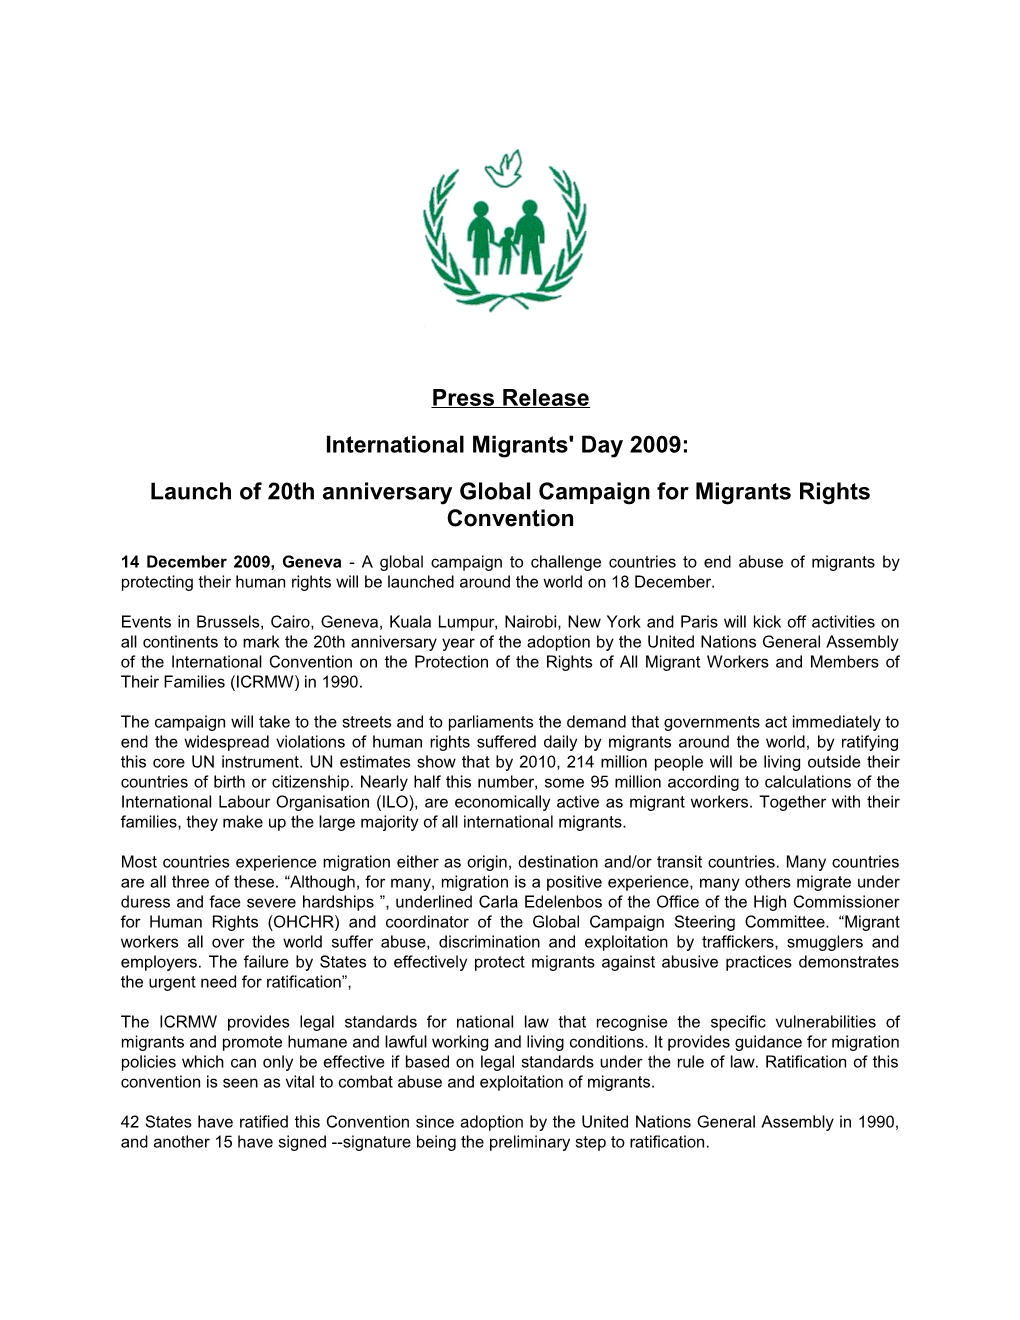 Launch of 20Th Anniversary Global Campaign for Migrants Rights Convention